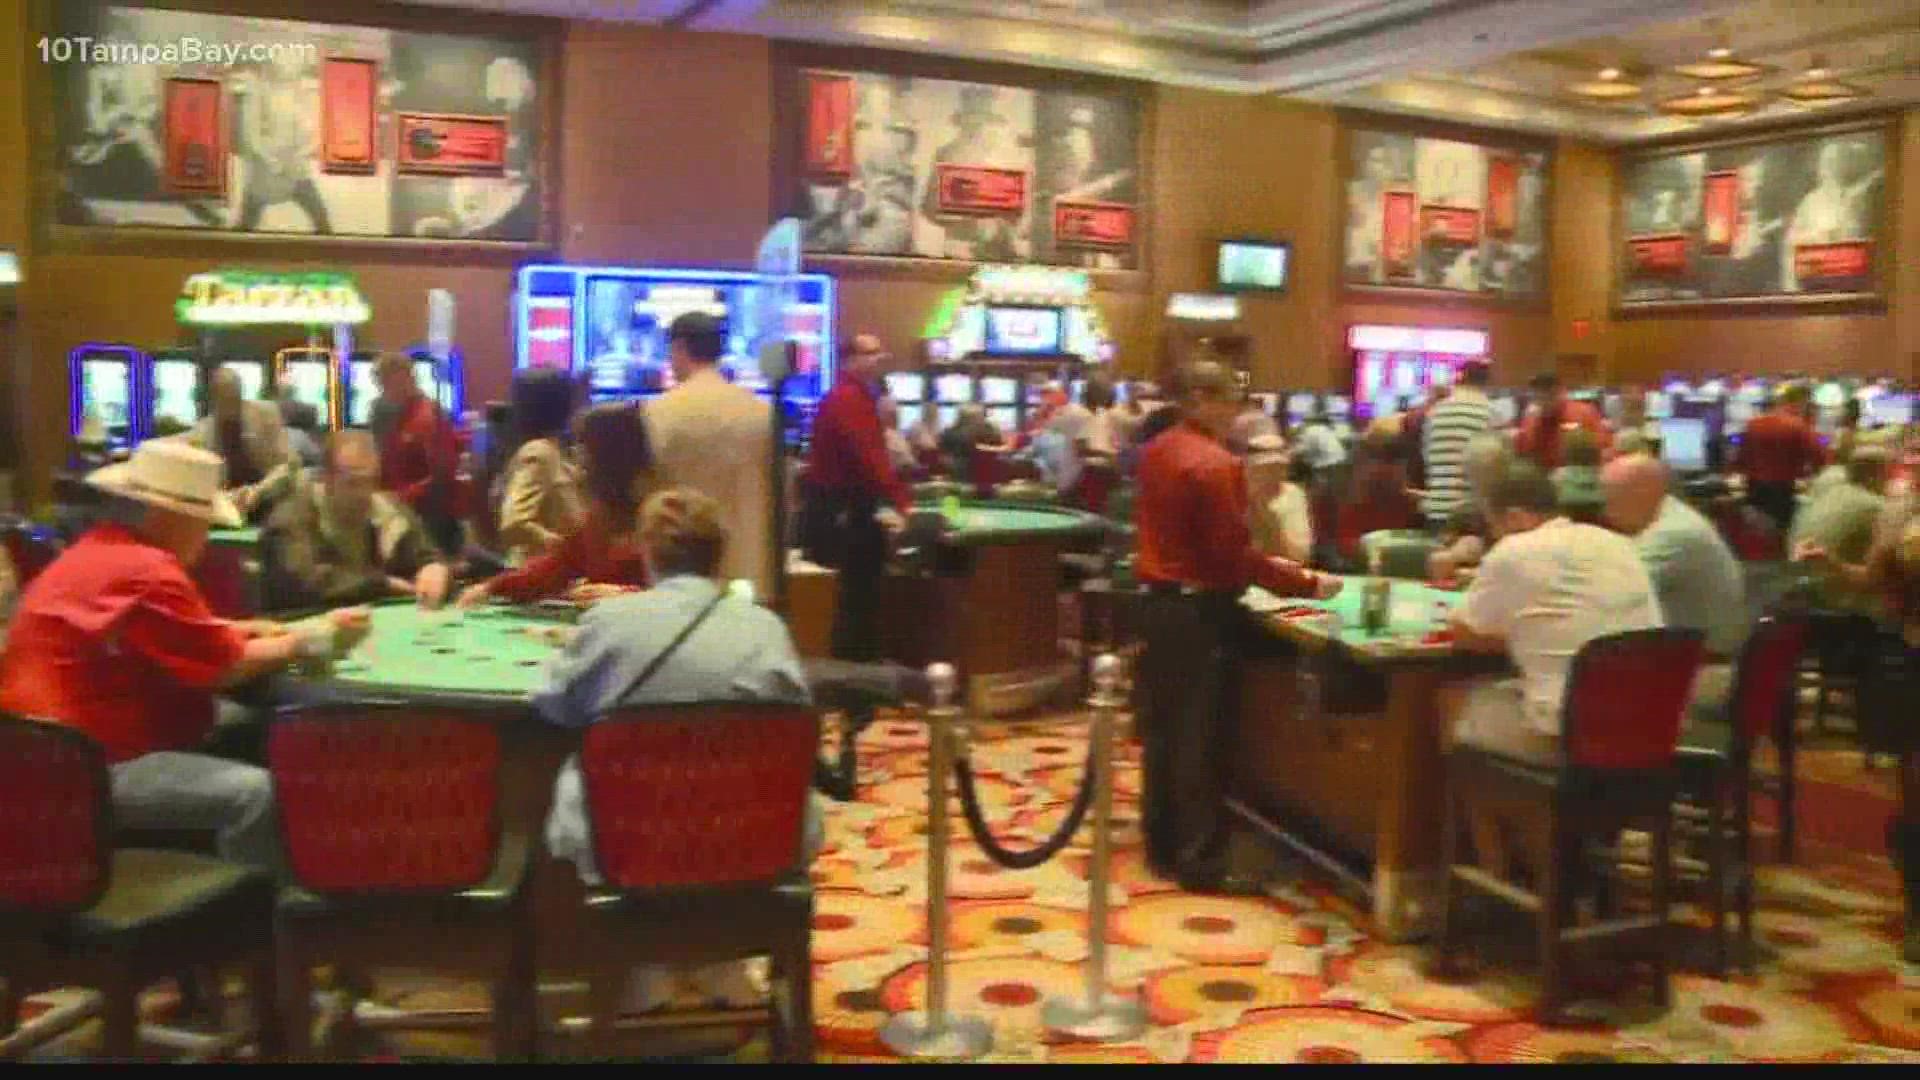 The 30-year deal paves the way for sports betting, craps and roulette in the state.